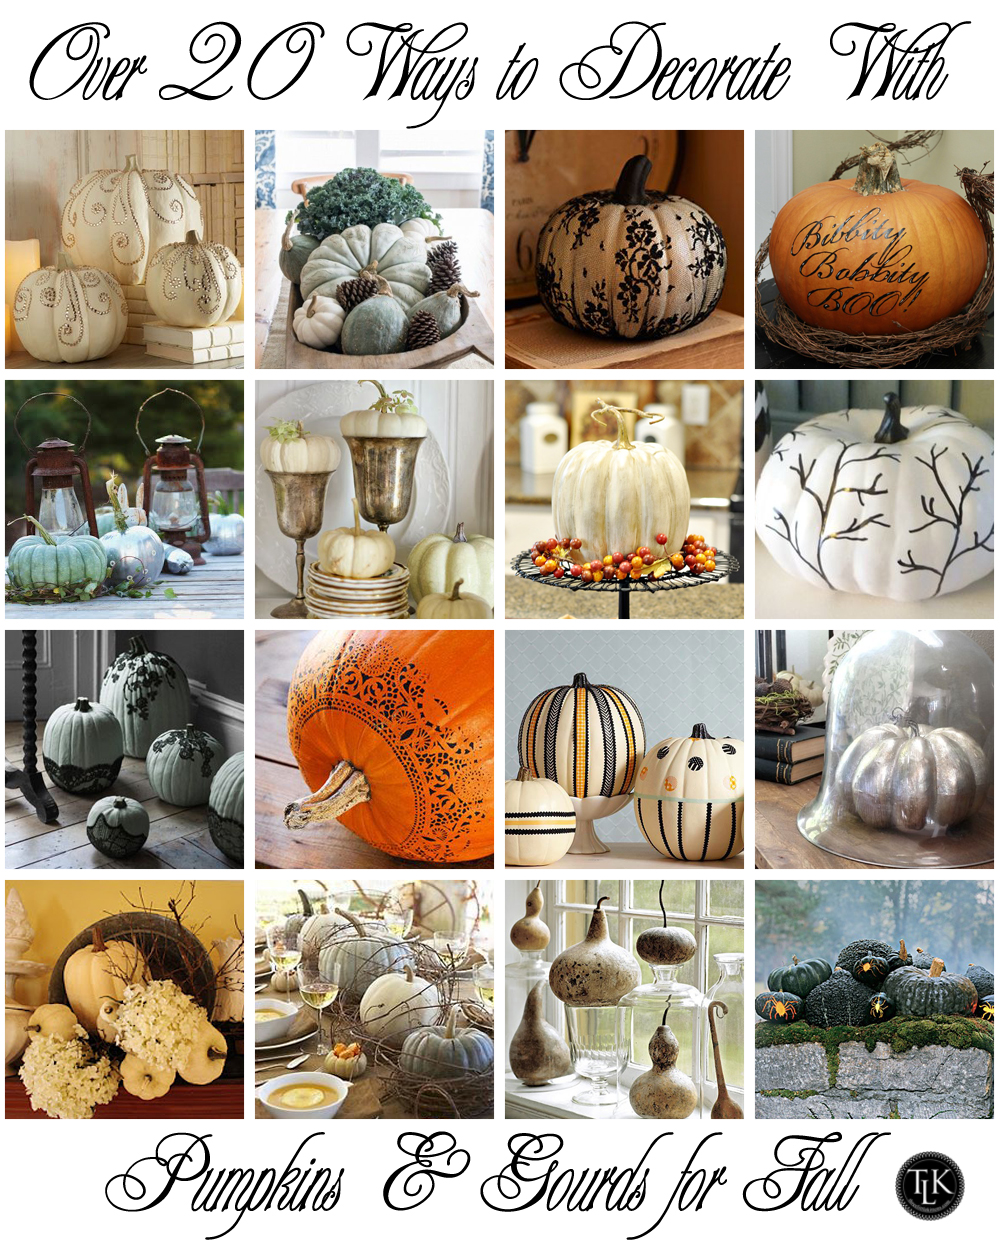 Over-20-Ways-to-Decorate-With-Pumpkins-and-Gourds